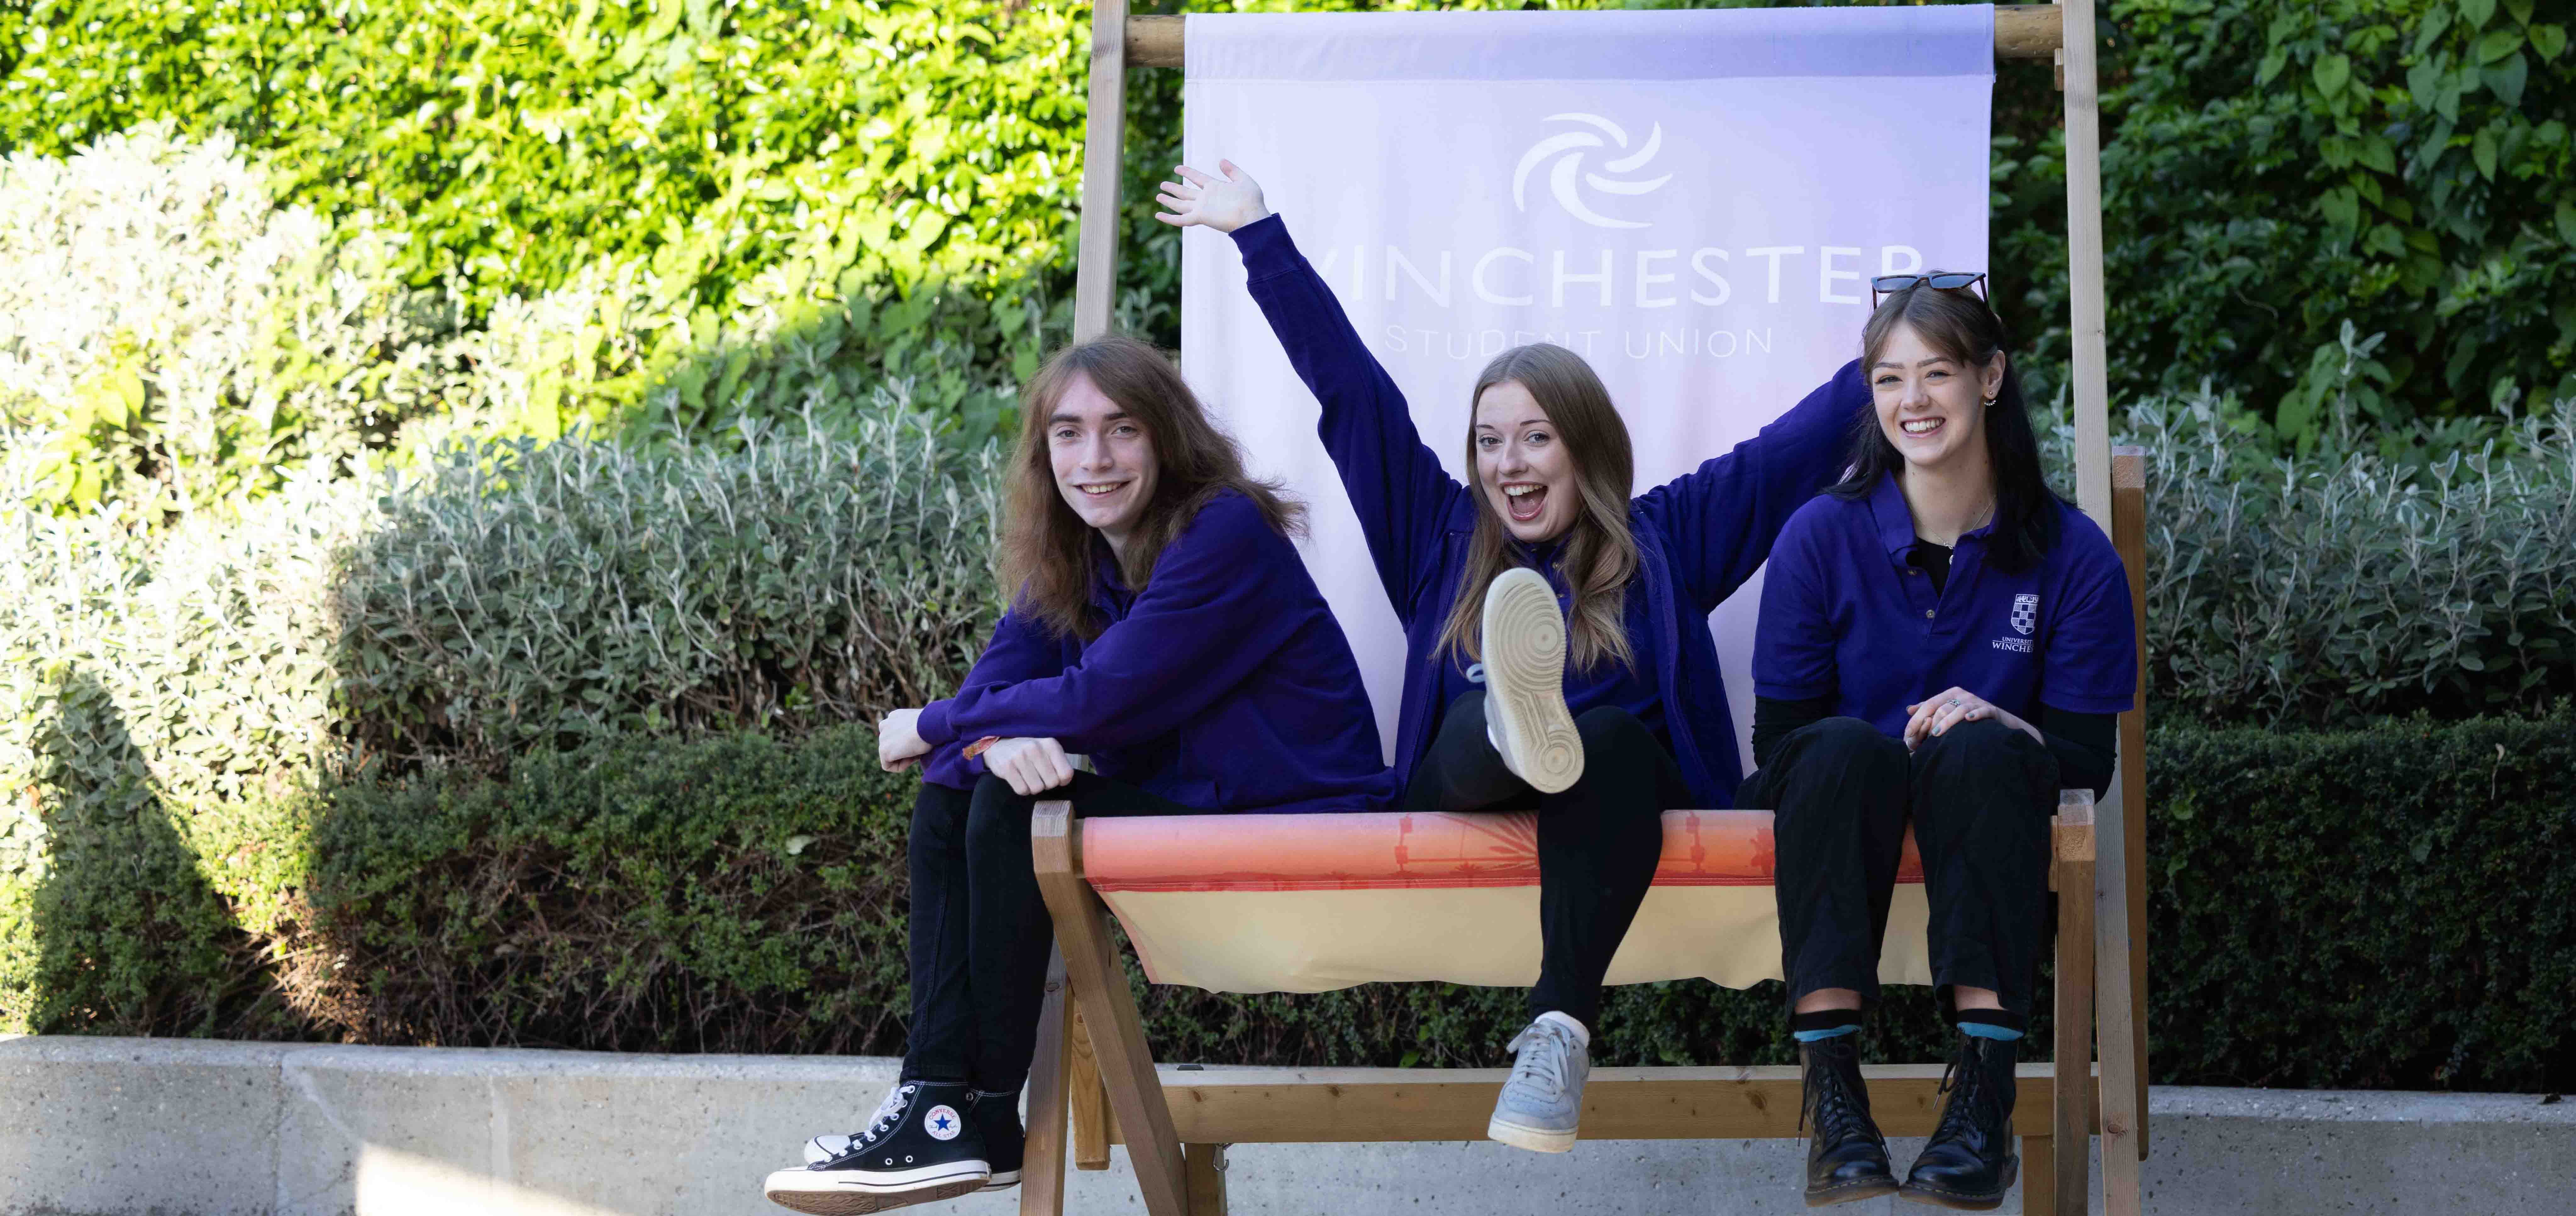 Students sat in giant deck chair